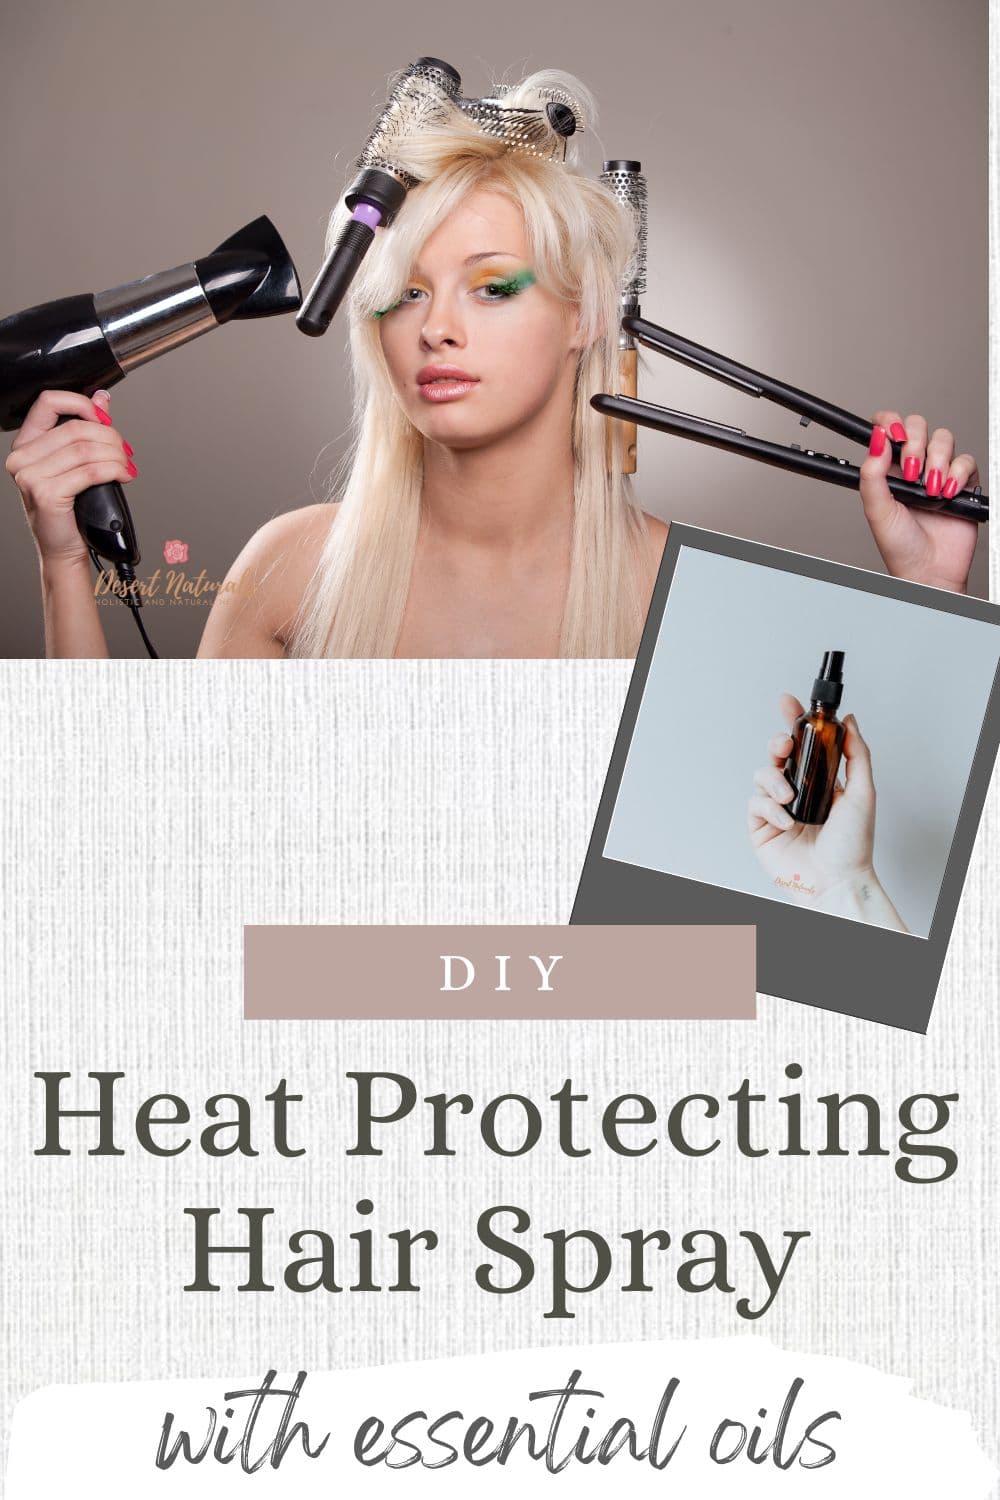 image of woman with hair dryer, heat flatiron, and text for diy heat protecting hair spray with essential oils